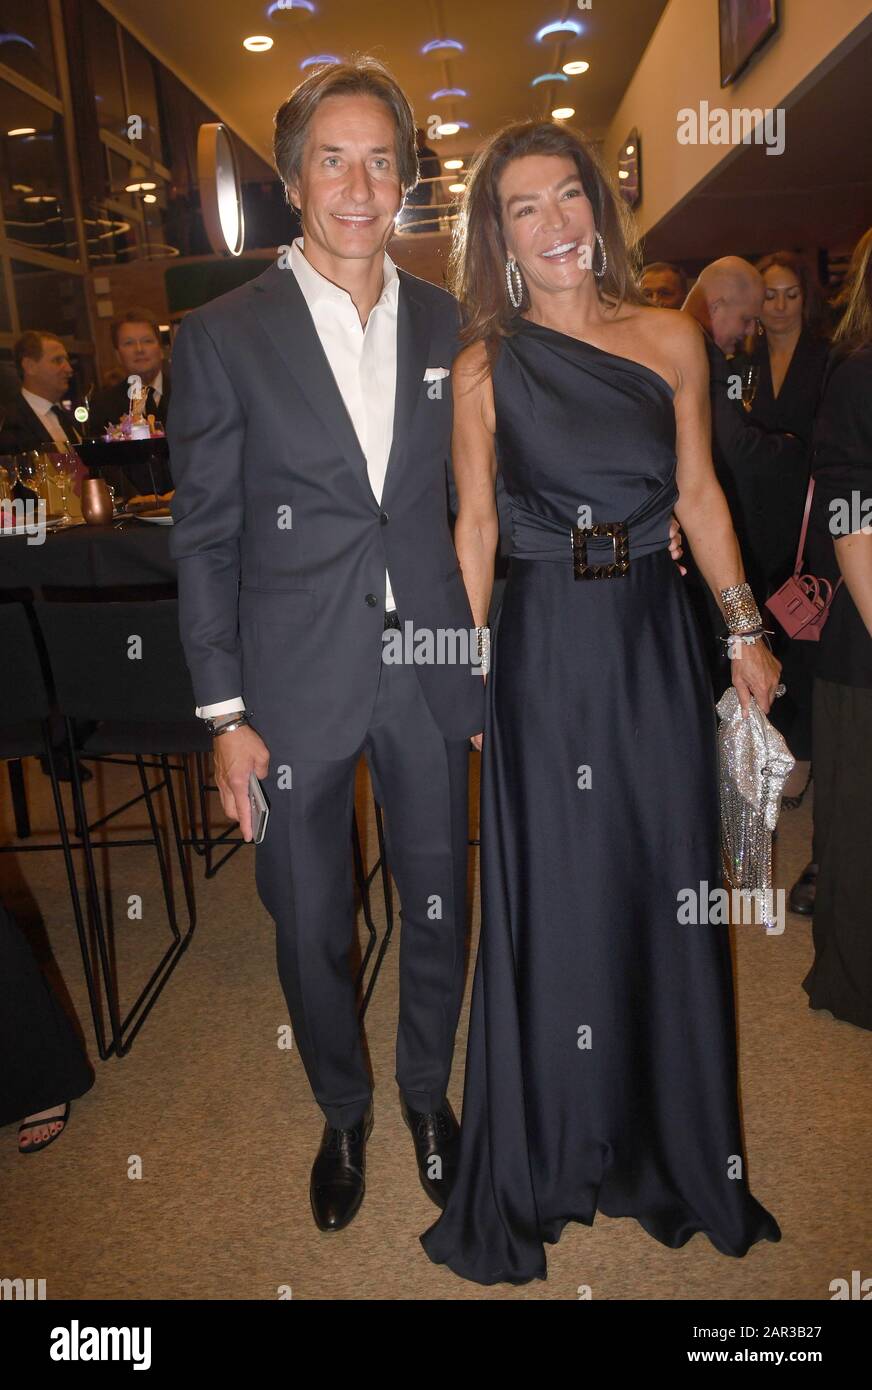 25 January 2020, Austria, Kitzbühel: Karl-Heinz Grasser, former Austrian Minister of Finance, and his wife Fiona Swarovski, entrepreneur, will attend the Kitz Race Party 2020, which took place at the Kitz Race Club on the evening of the men's downhill race on the Streif. Photo: Felix Hörhager/dpa Stock Photo